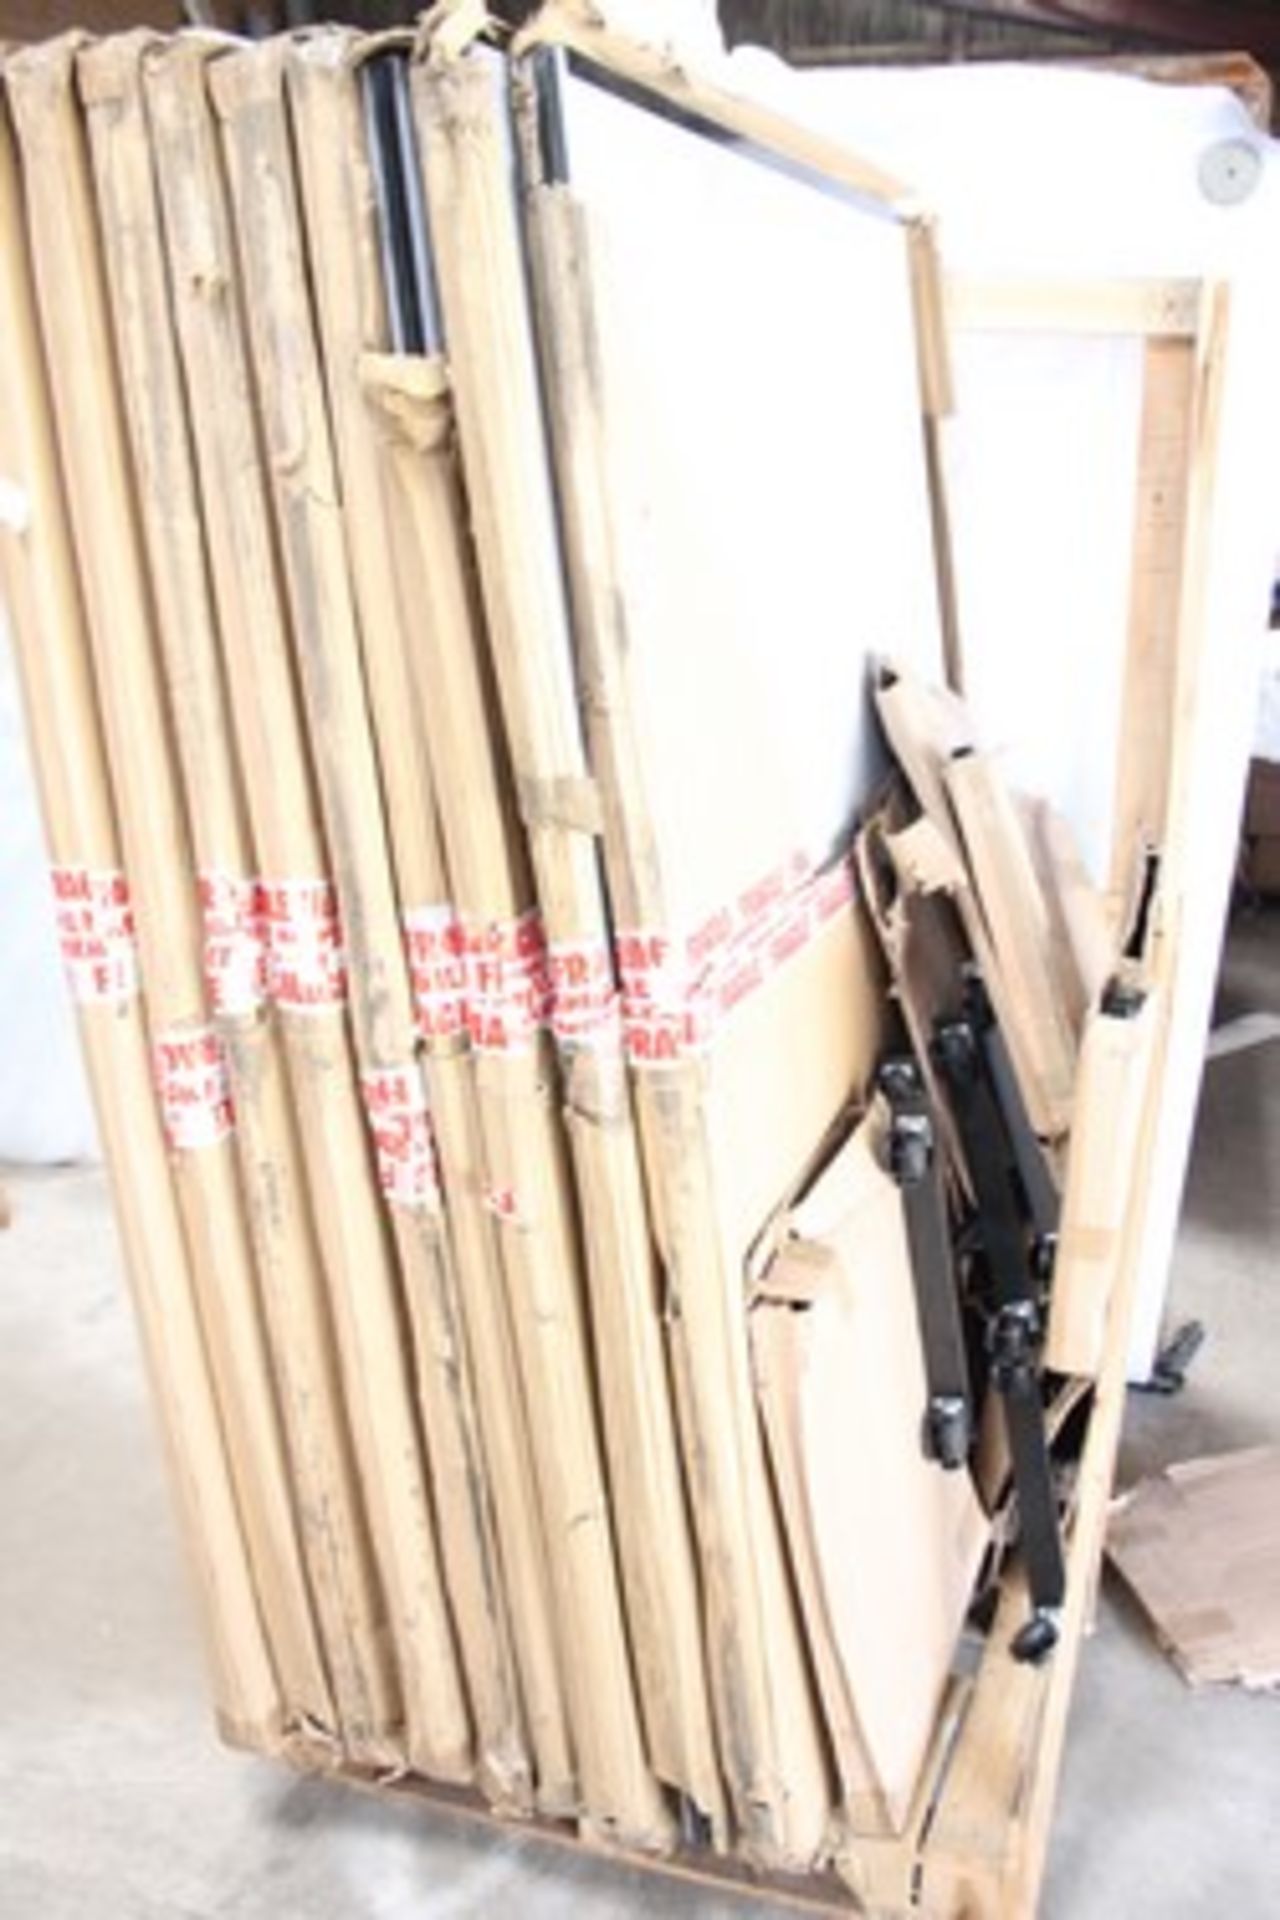 1 x pallet of office screens, size 180cm x 120cm colour - light grey, together with 8 x boxes each - Image 2 of 3